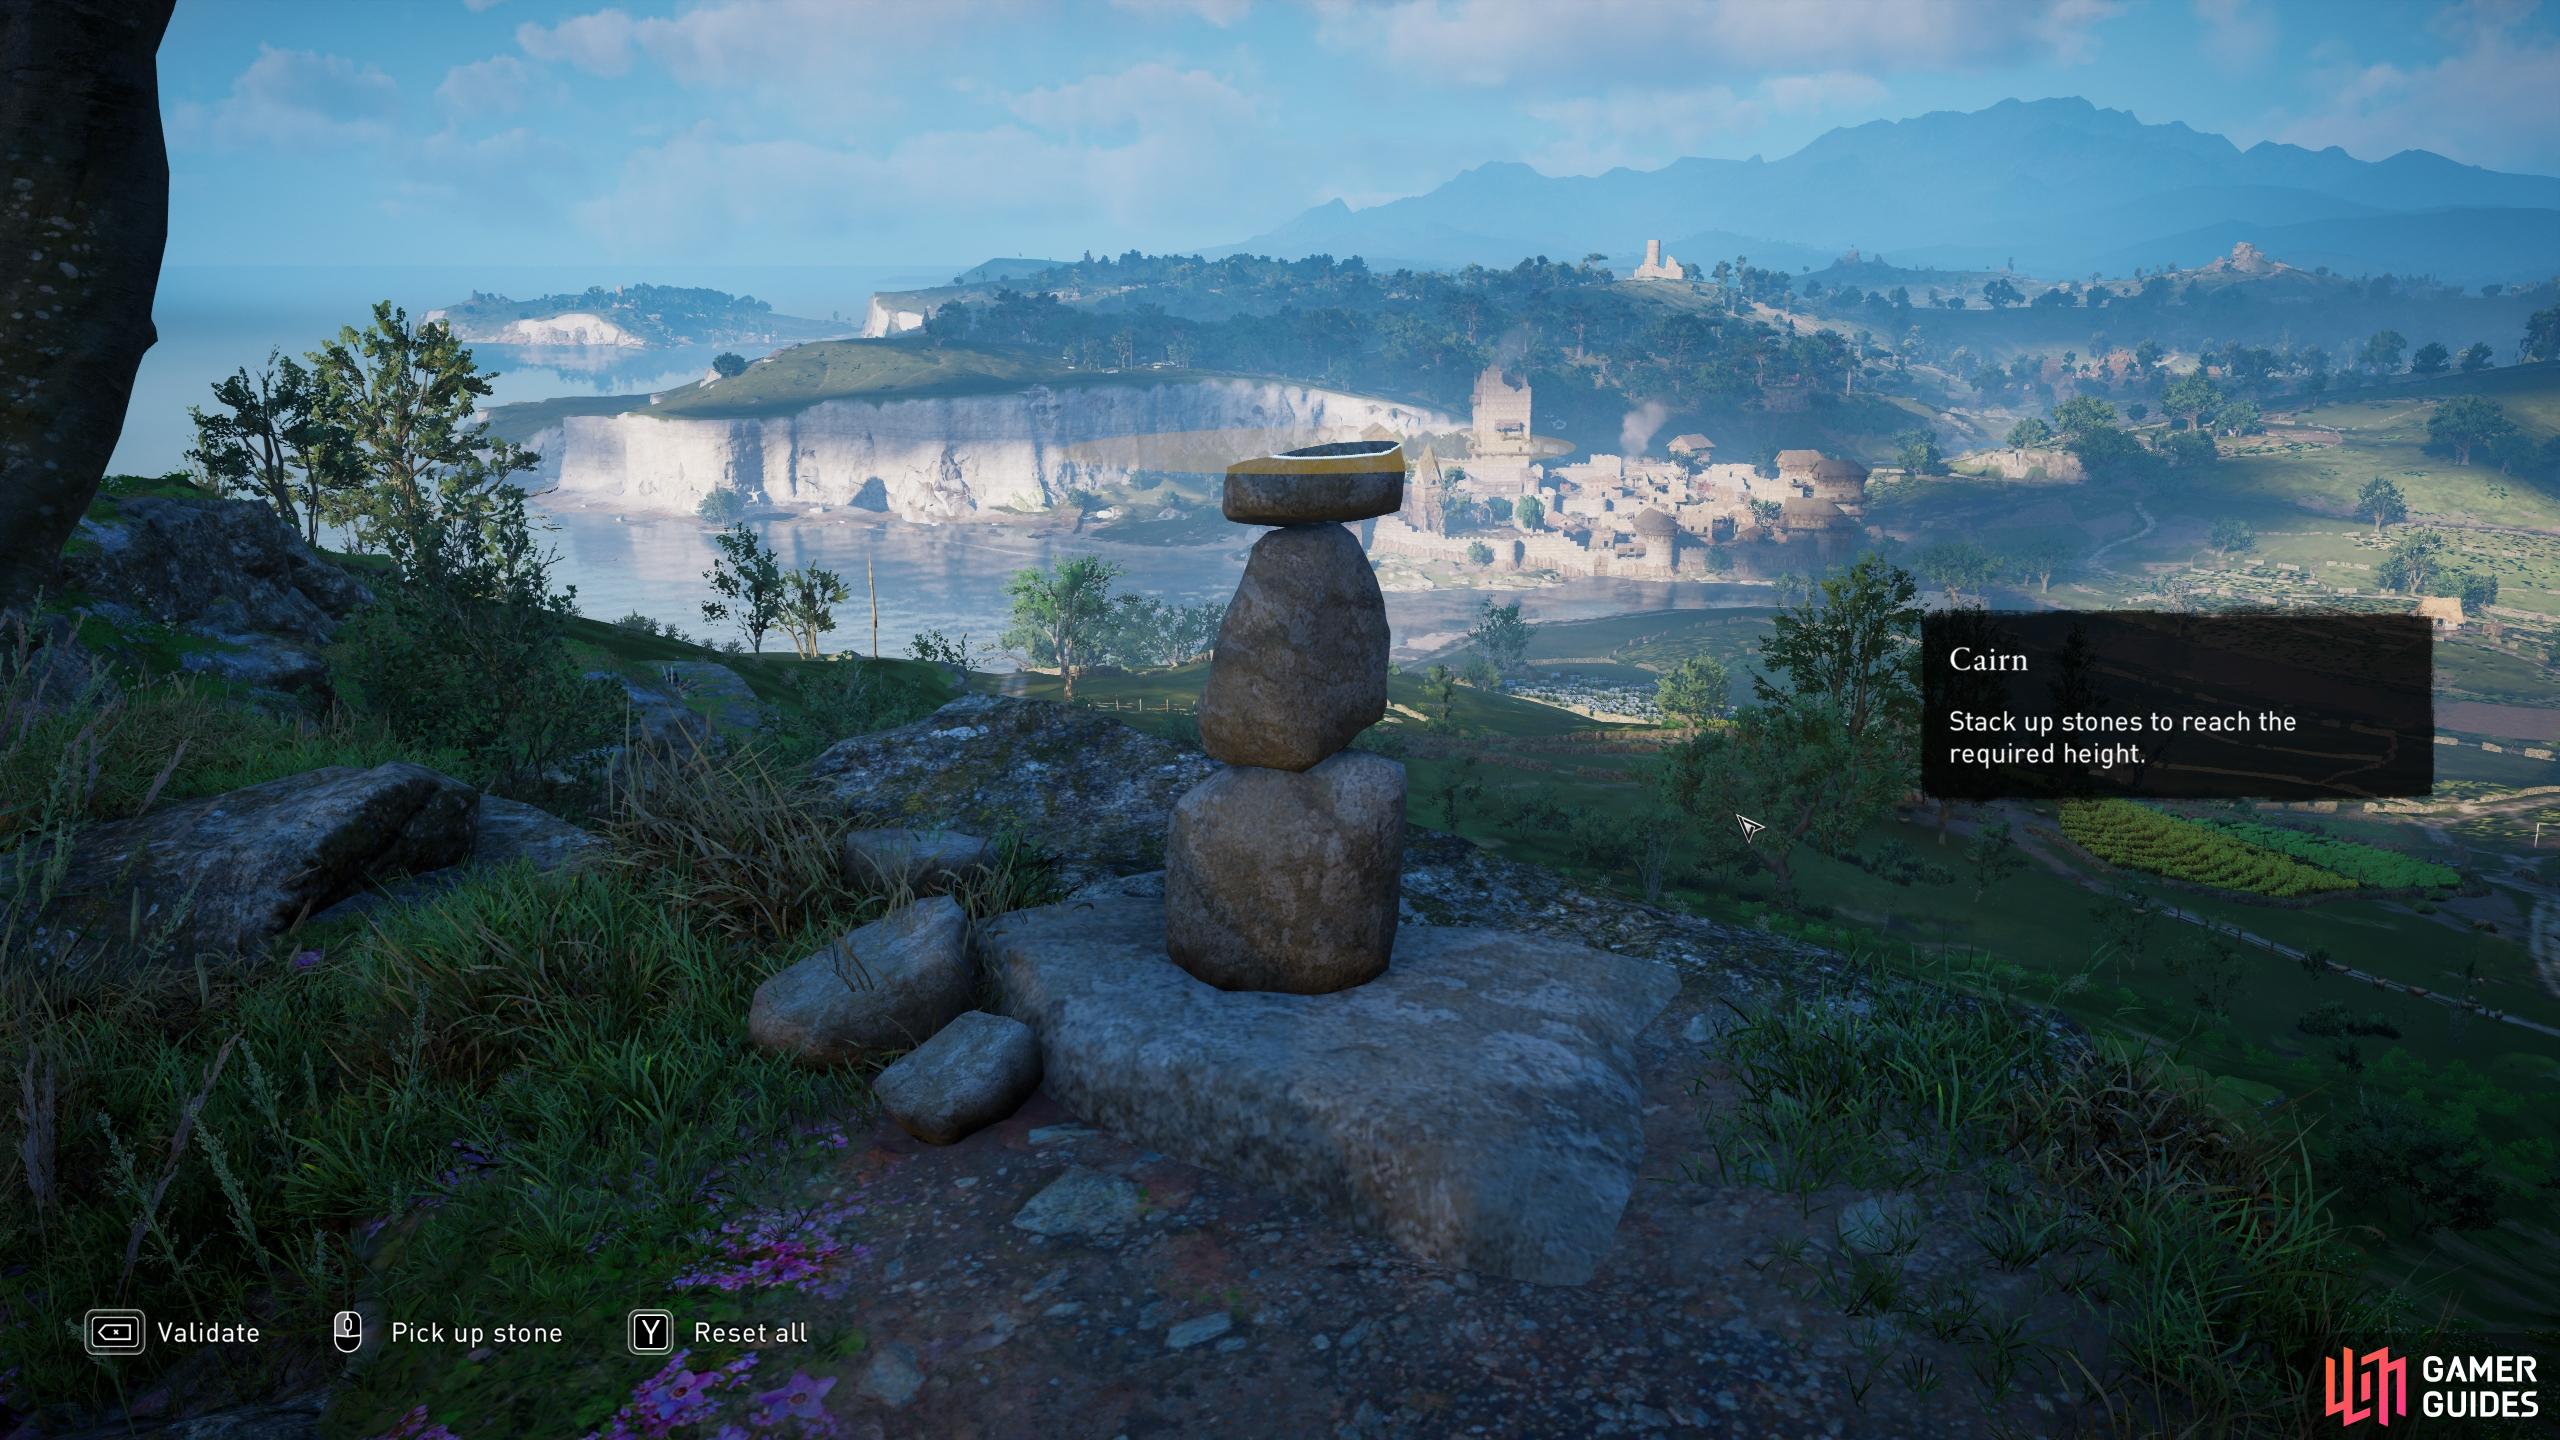 Stack the stones to the required height and then validate their position to complete the mystery.